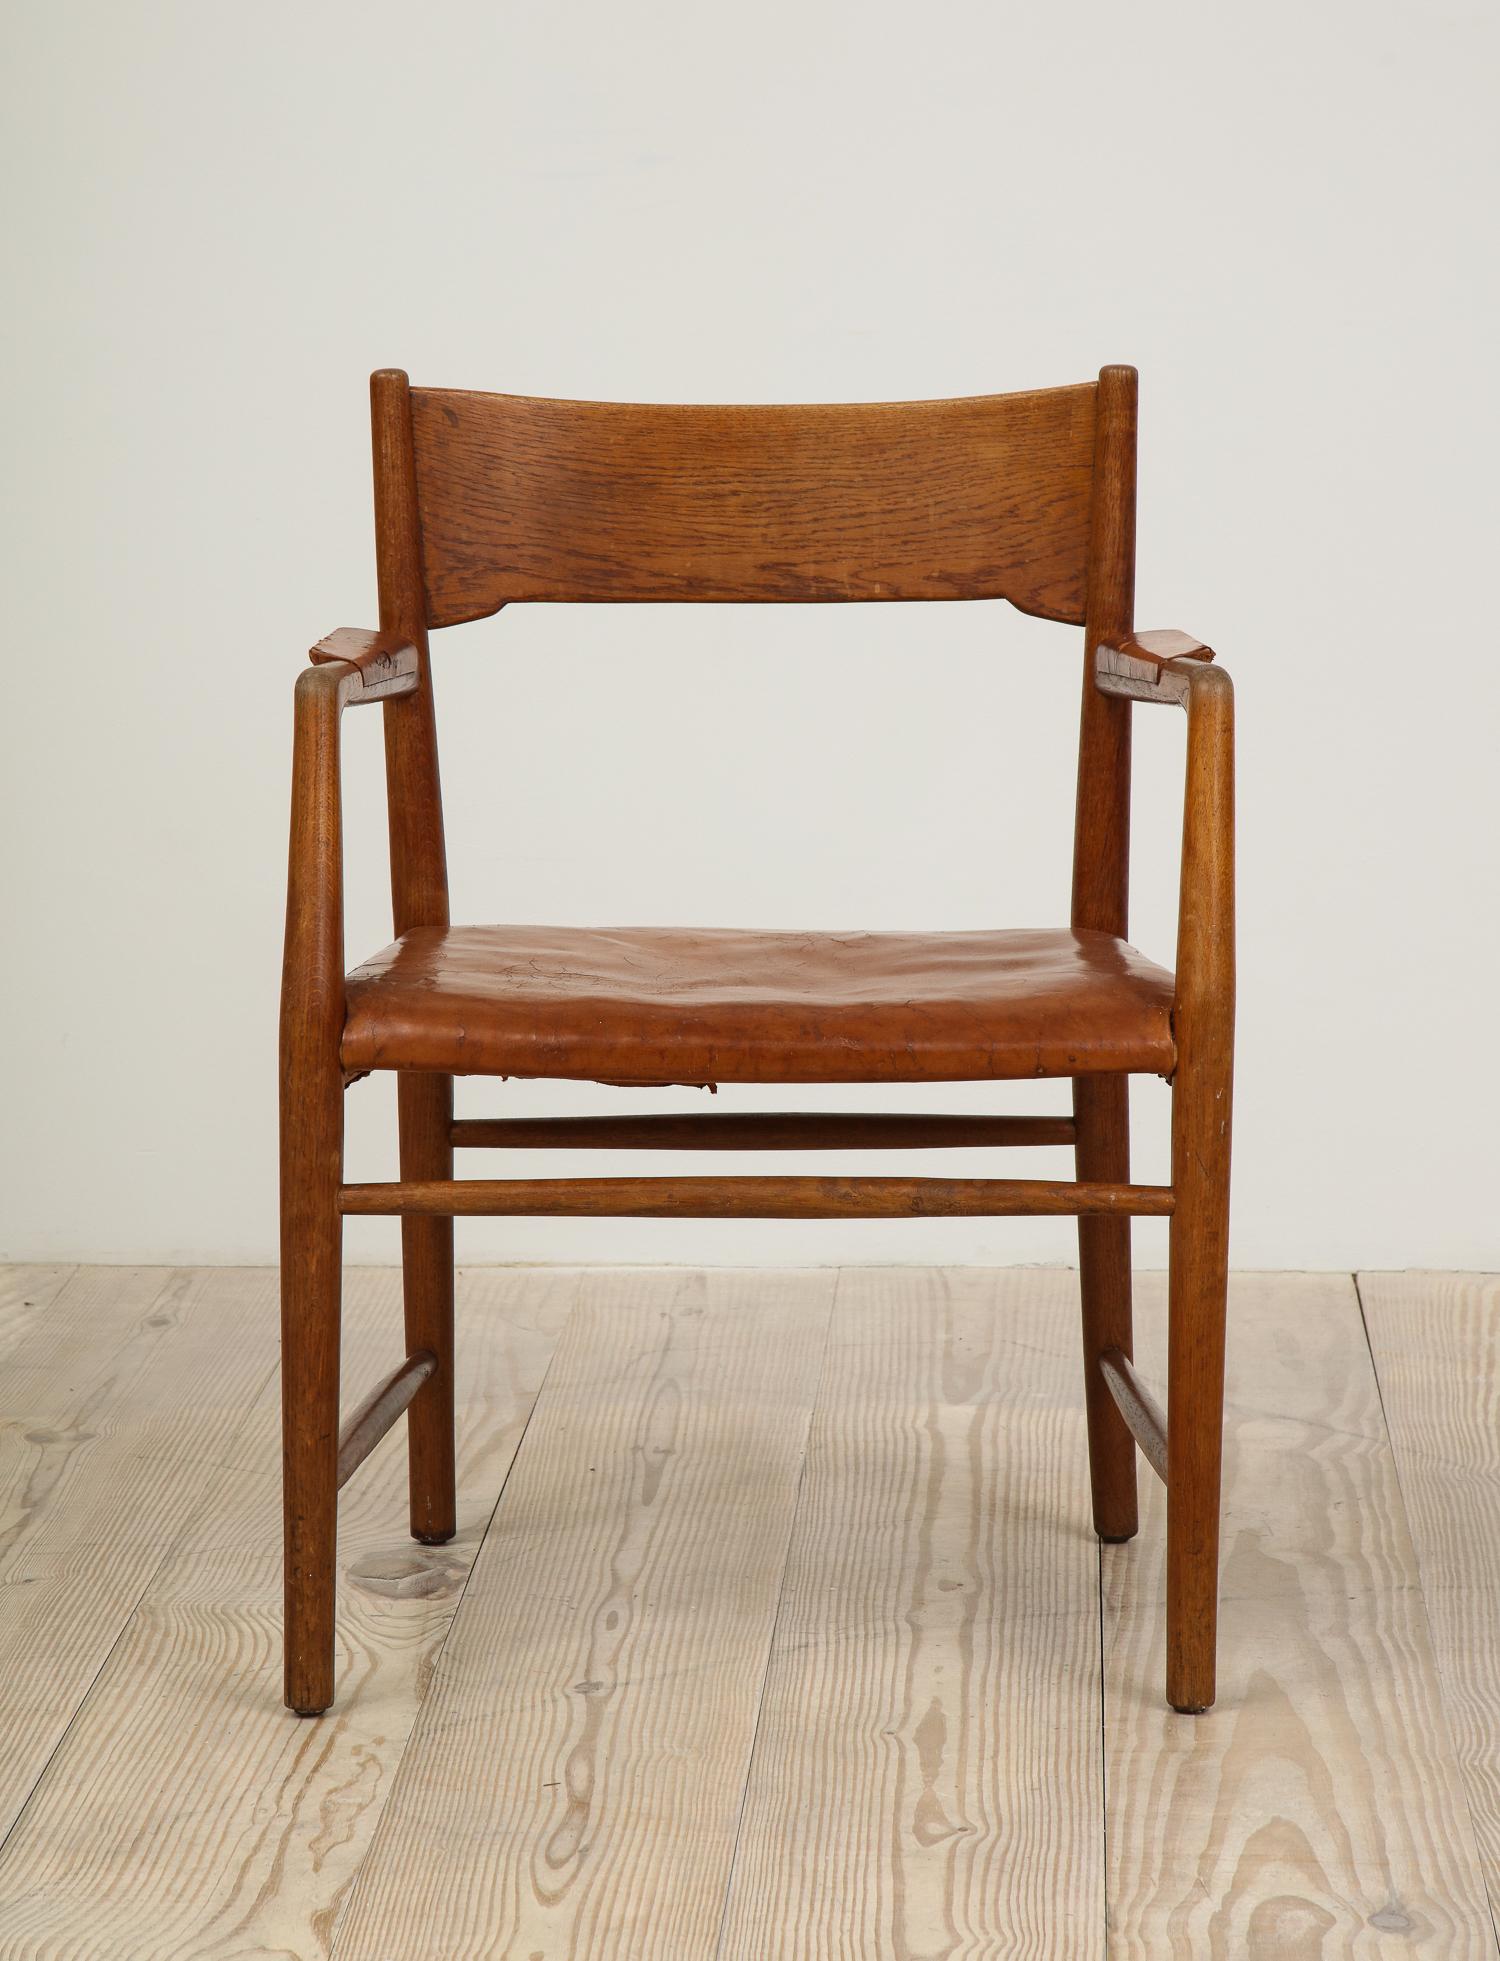 Hans Jørgensen Wegner (1914 Tønder-Gentofte 2007), Aarhus city hall armchair, circa 1937-1942, oak frame and back with original leather seat, manufactured by Fritz Hansen

Provenance: Aarhus City Hall, Aarhus, Denmark

This is a very rare version of